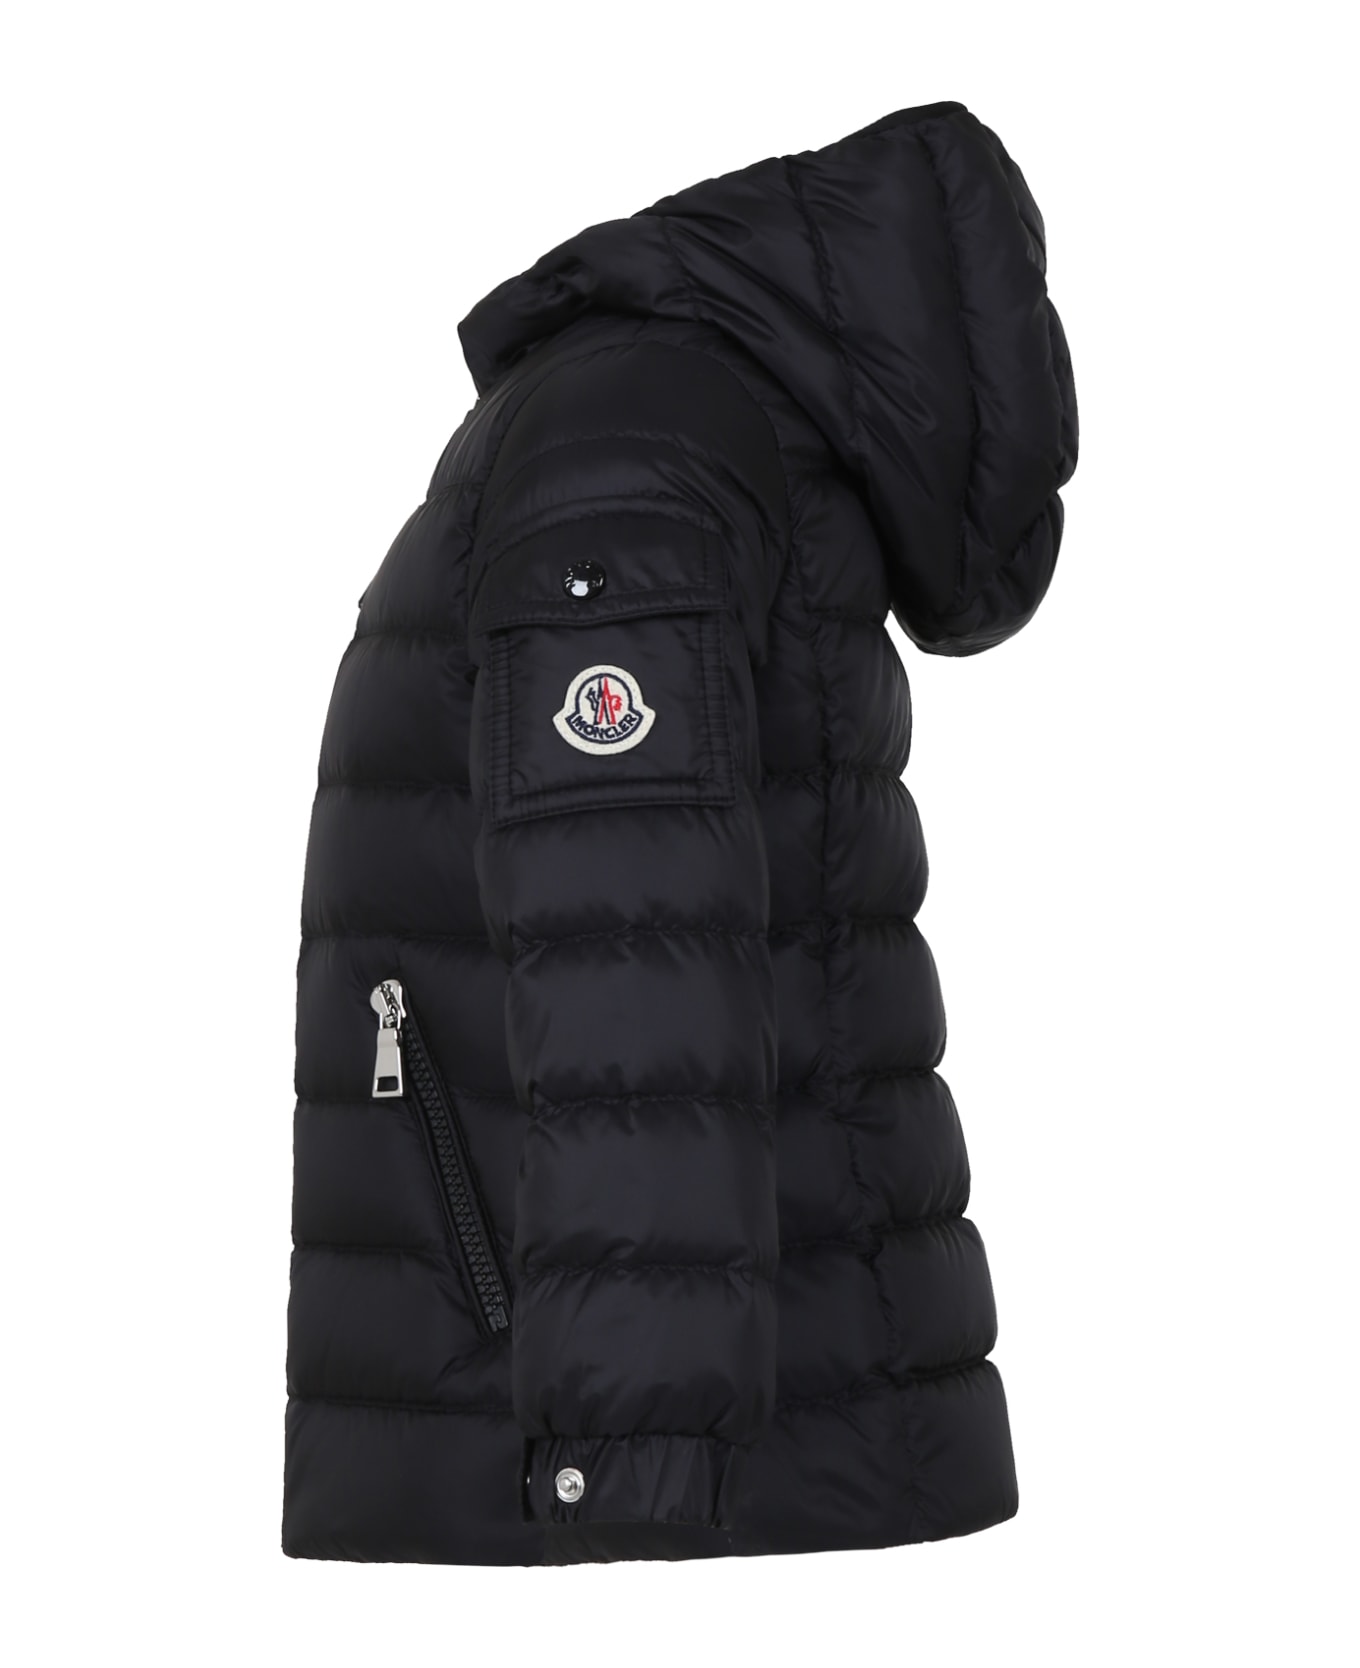 Moncler Down Jacket With Hood For Girl - Black